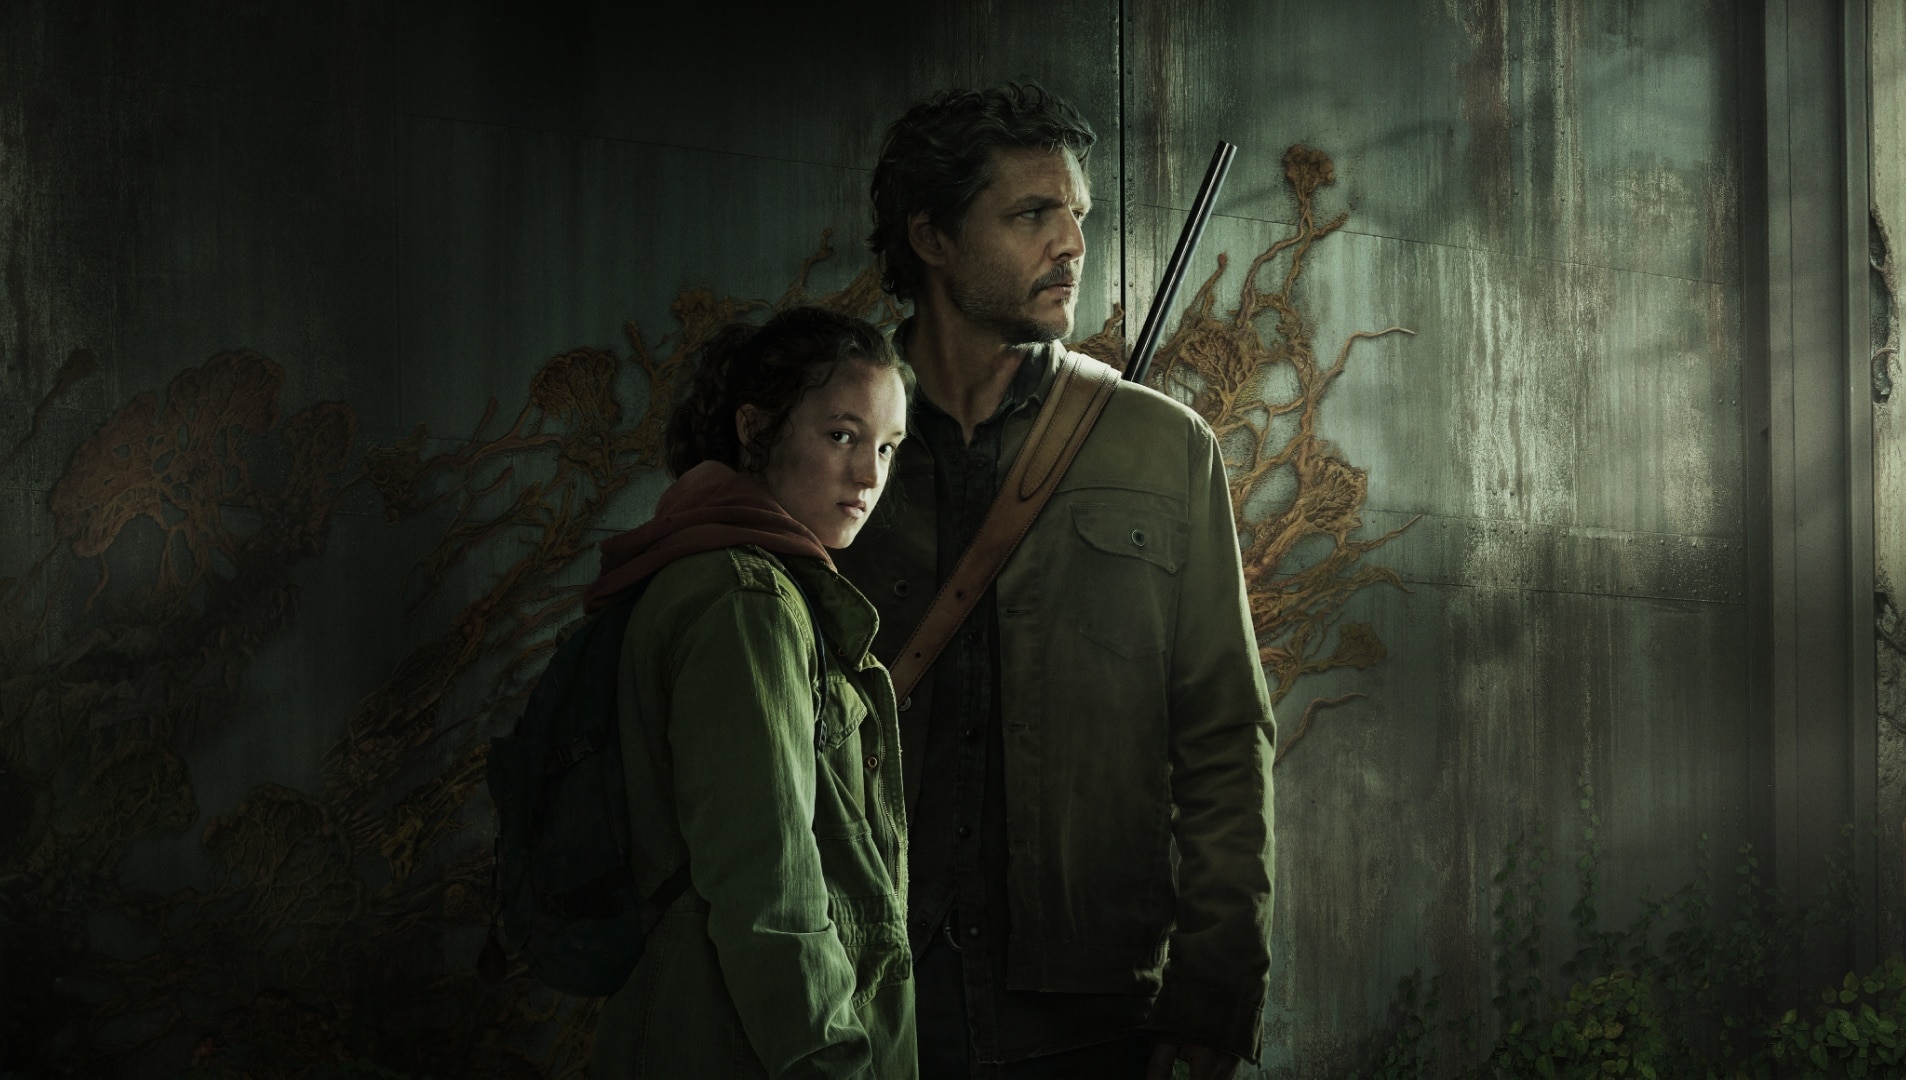 The Last Of Us, Episode 6 Kin PROMO